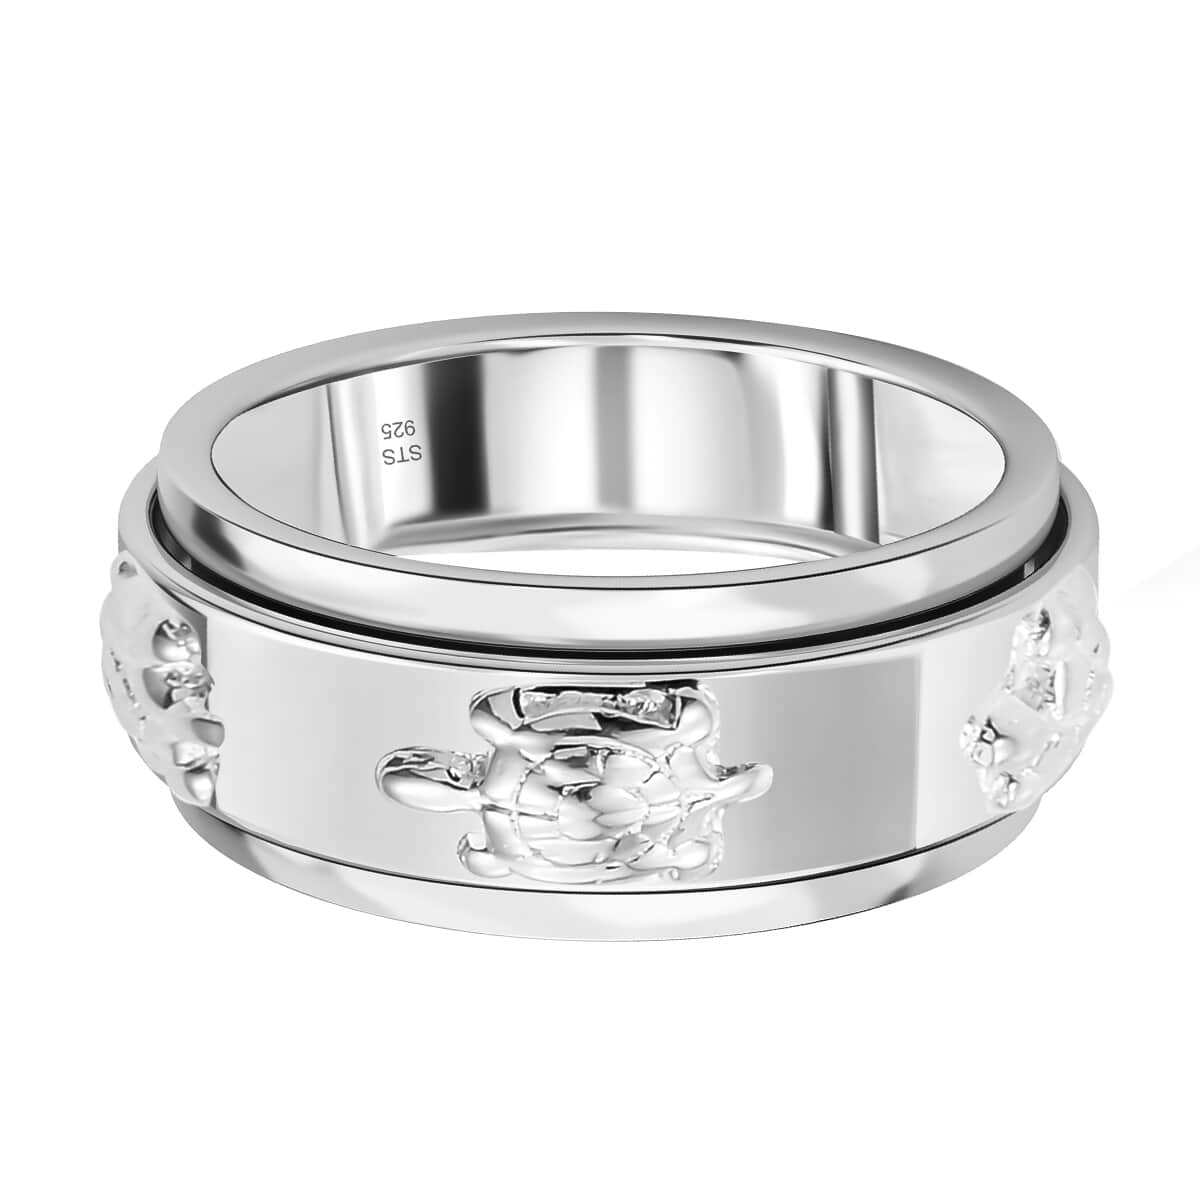 Sterling Silver Turtle Band Spinner Ring, Anxiety Ring for Women, Fidget Rings for Anxiety for Women, Stress Relieving Anxiety Ring, Promise Rings (Size 7.0) (5 g) image number 6